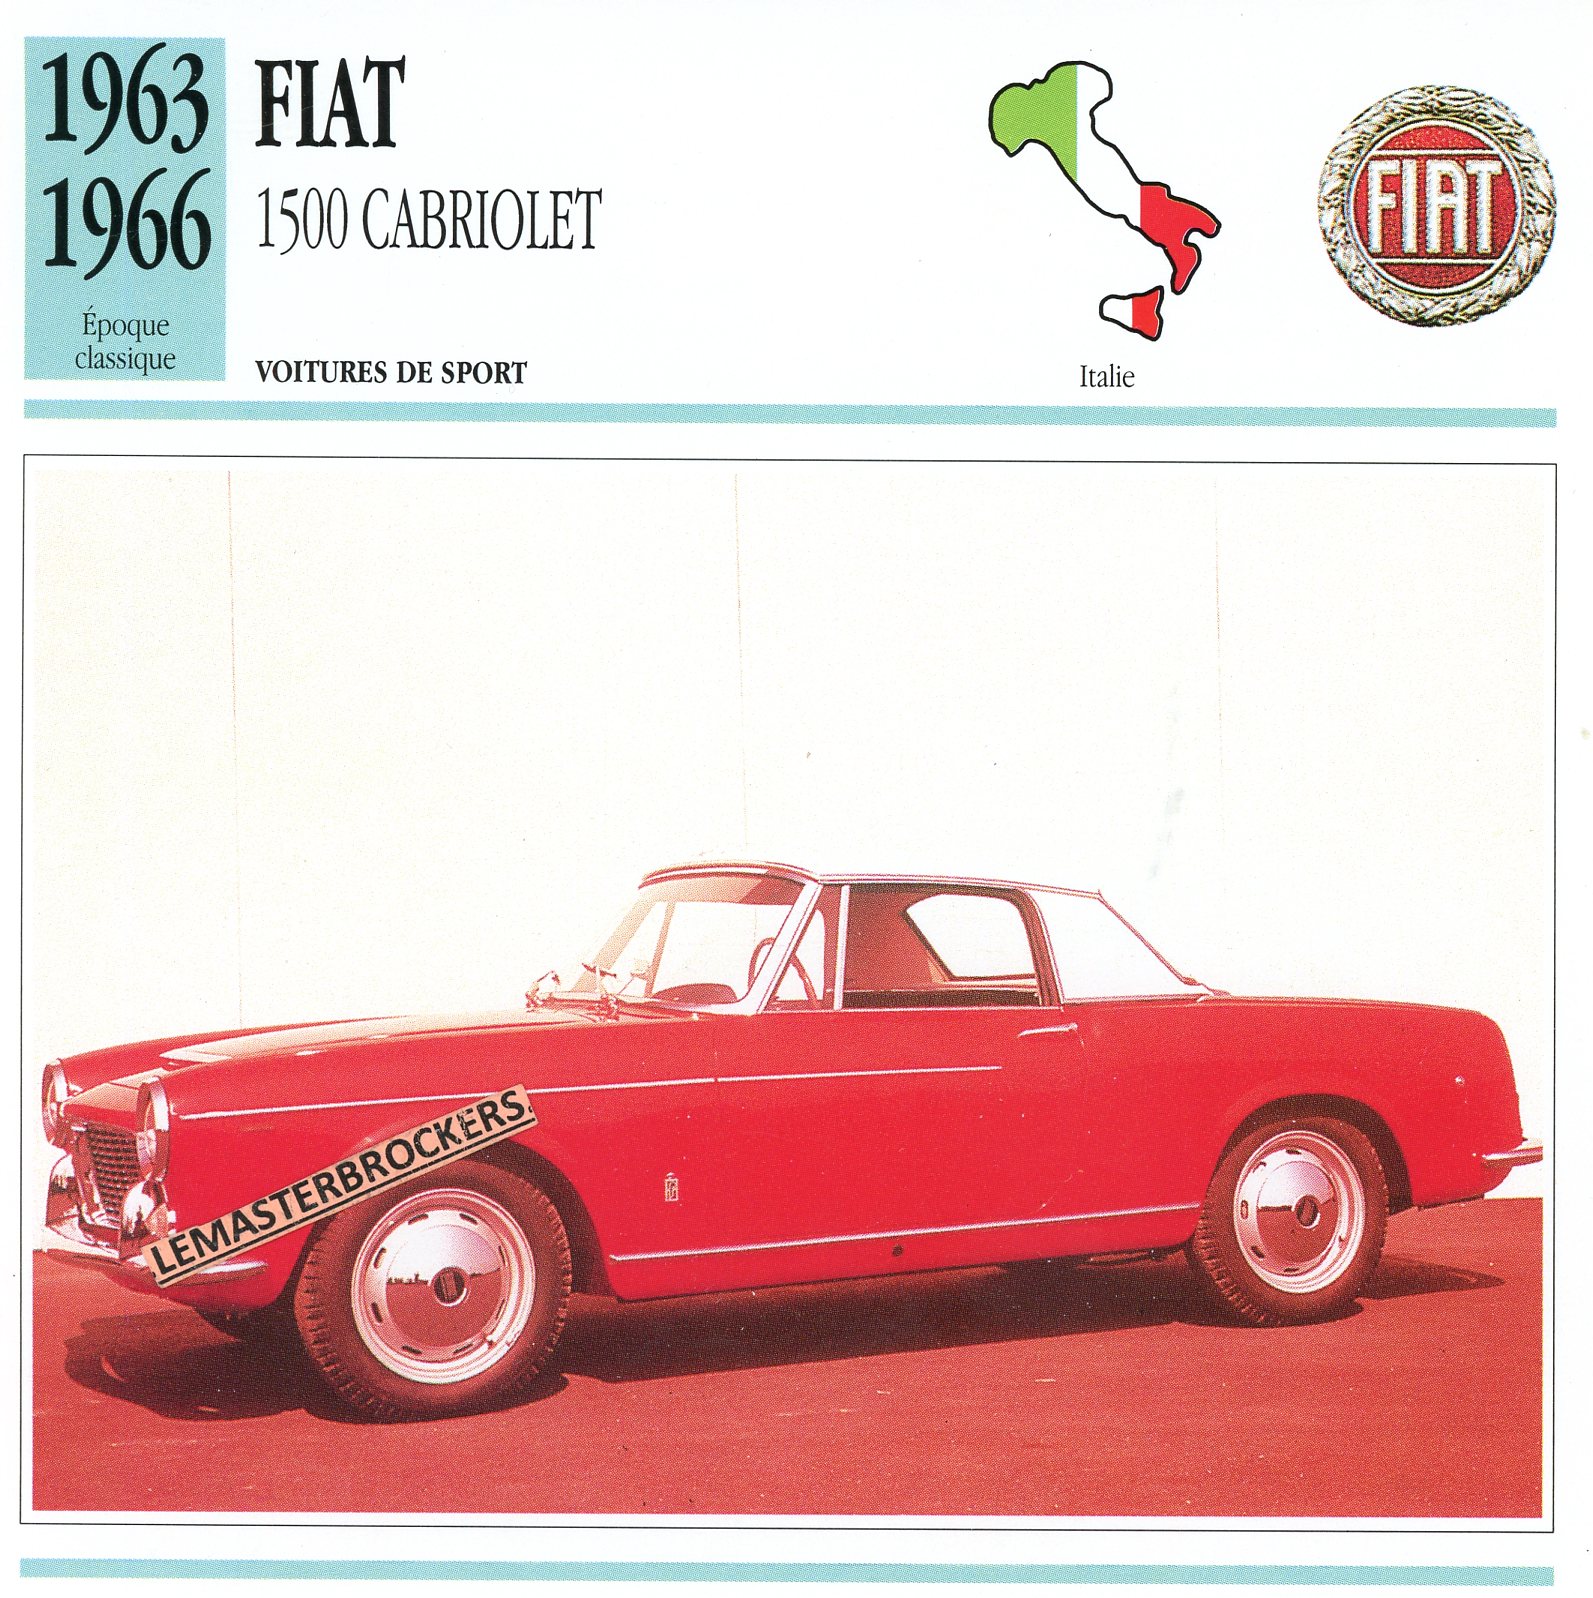 FICHE-AUTO-FIAT-1500-CABRIOLET-1963-1966-CARD-CARS-LEMASTERBROCKERS